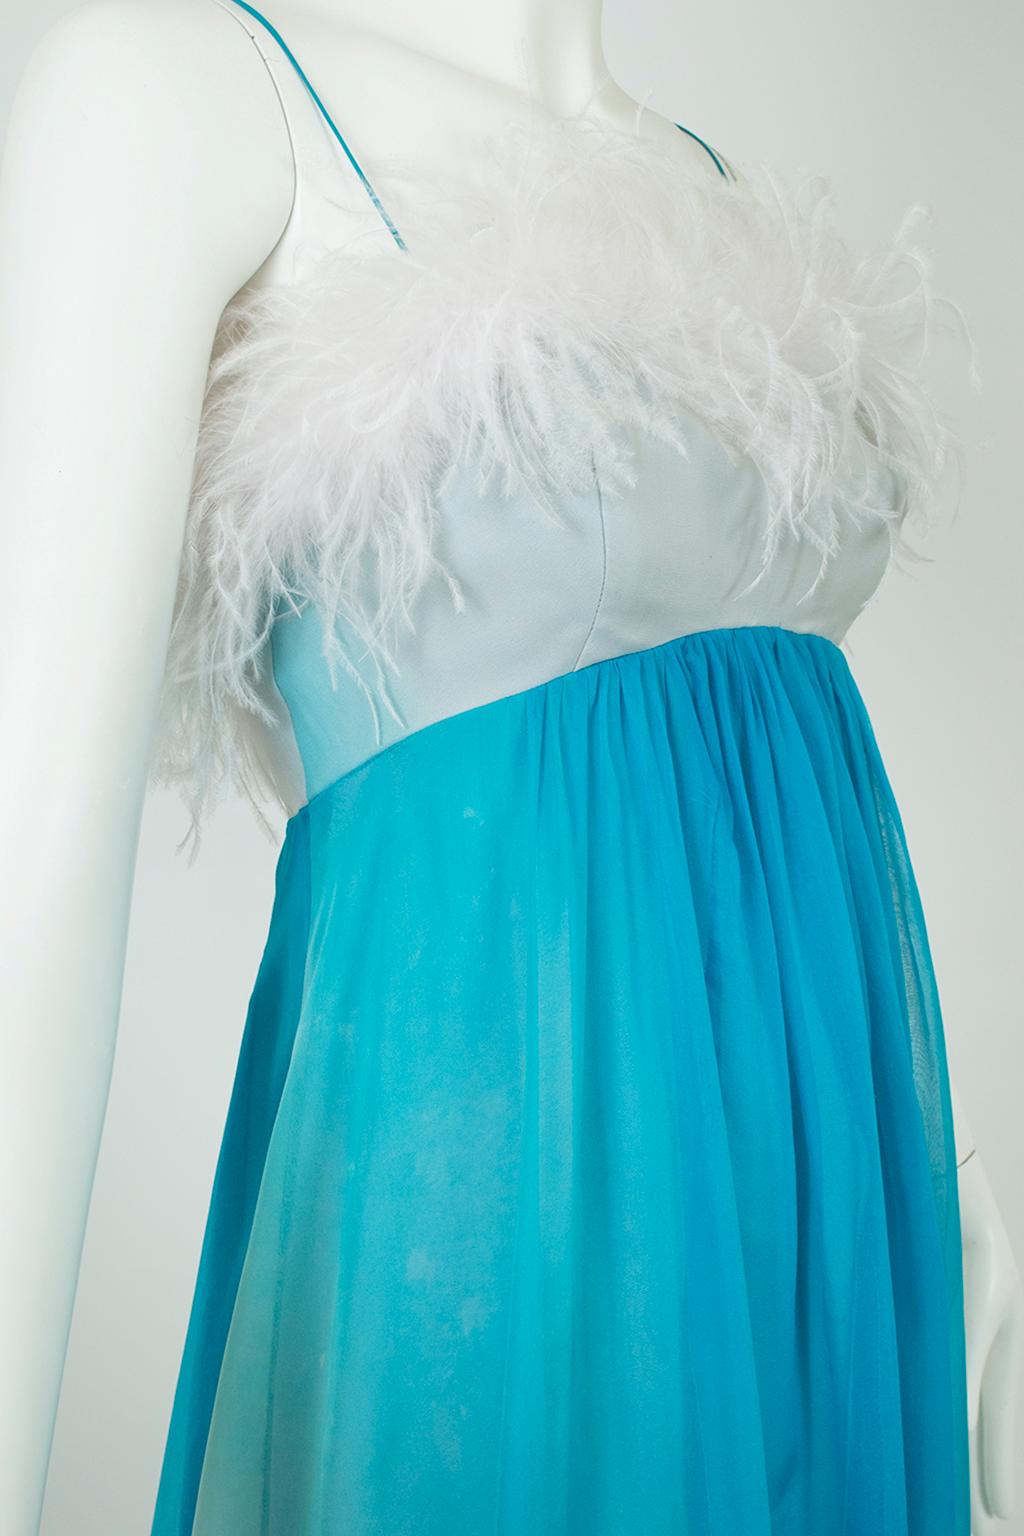 Aqua Ombré Tie Dye Chiffon Ball Gown with Ostrich Feather Trim – XS, 1960s For Sale 1